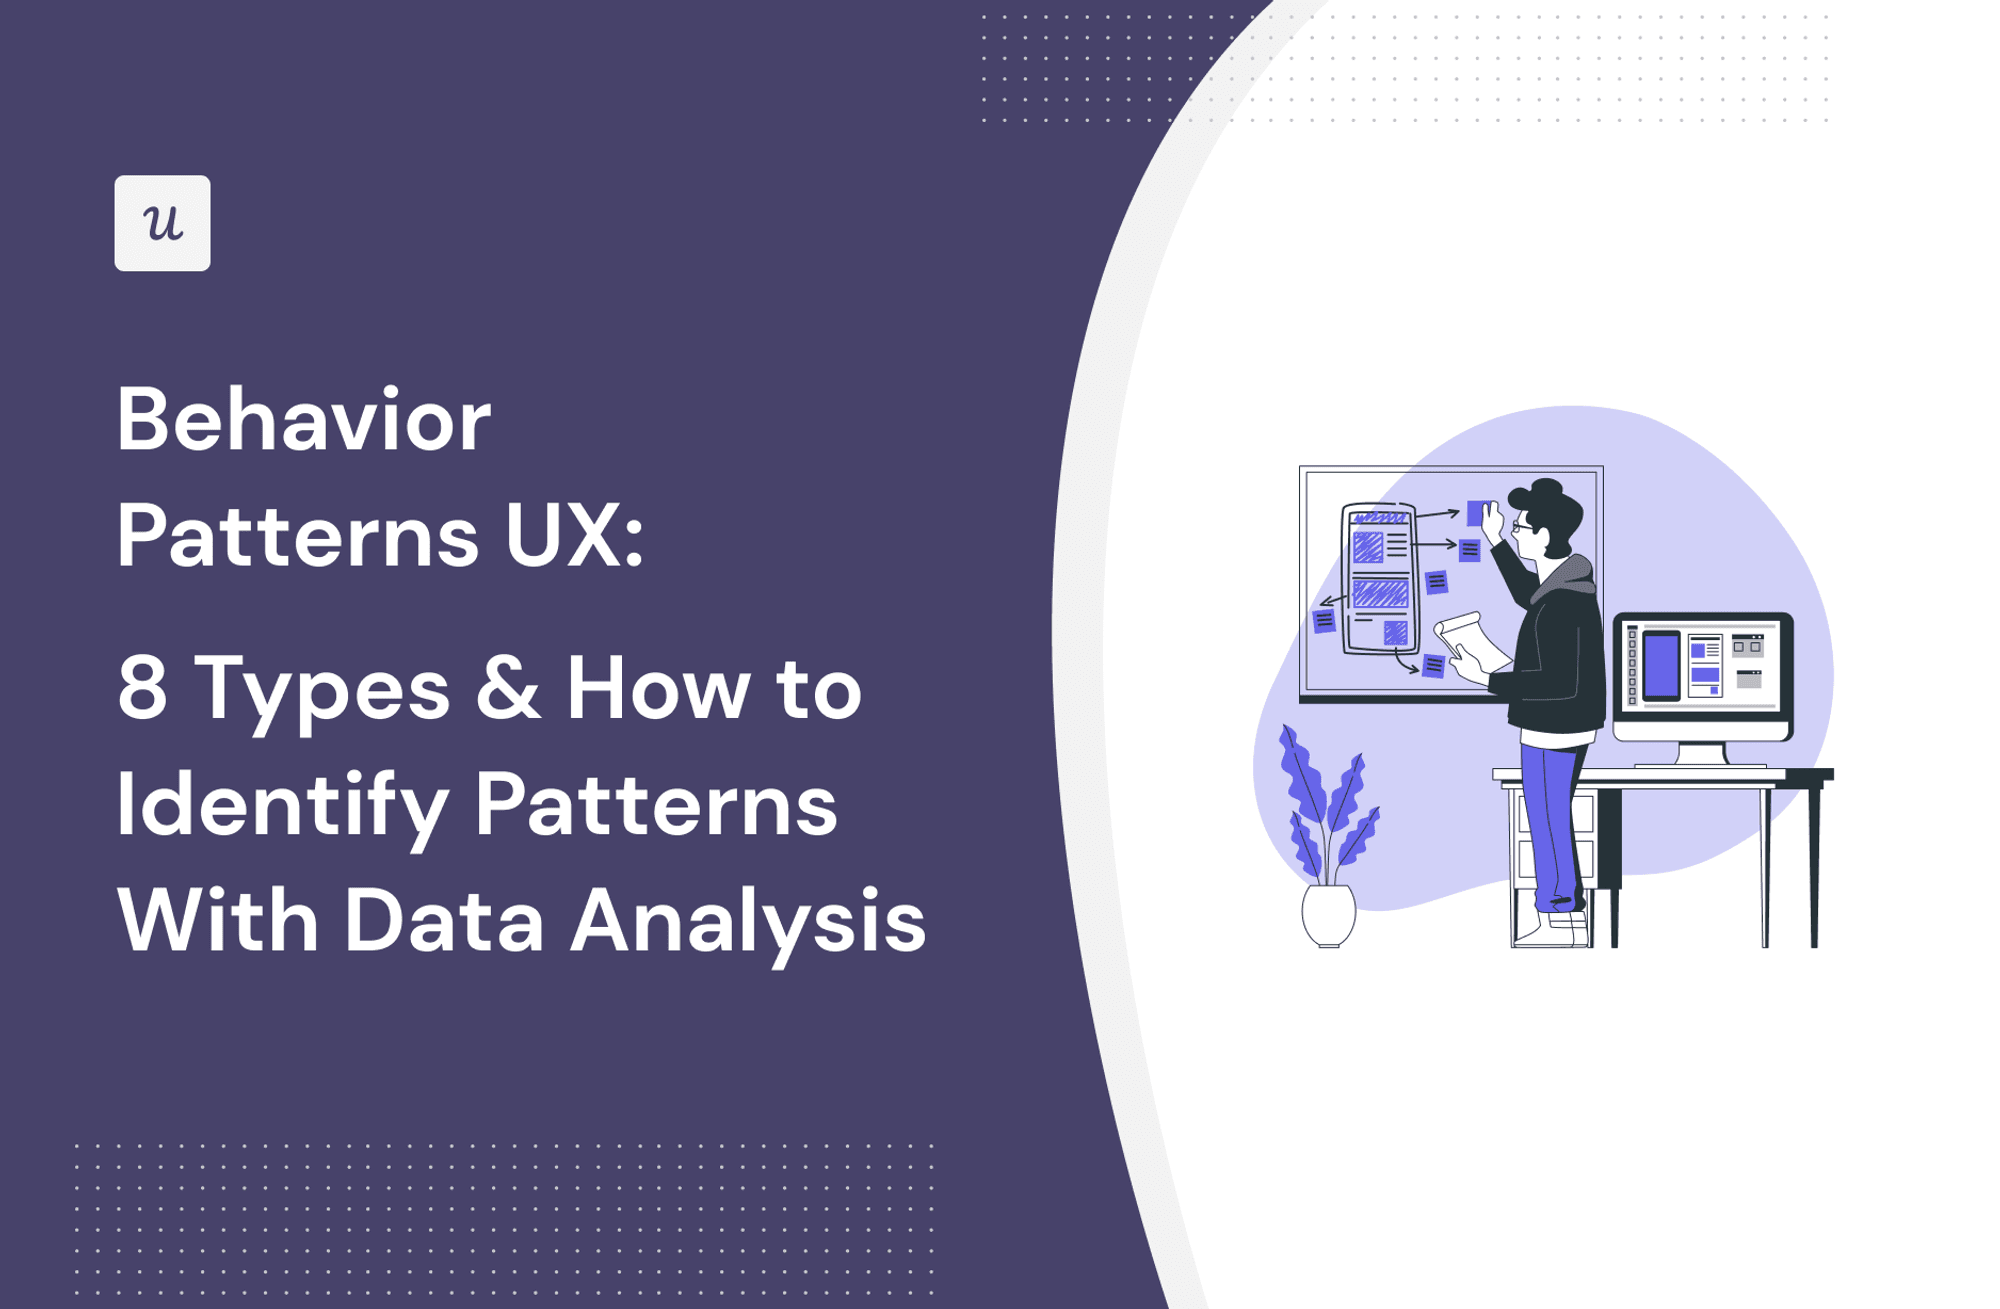 Behavior Patterns UX: 8 Types & How to Identify Patterns With Data Analysis cover